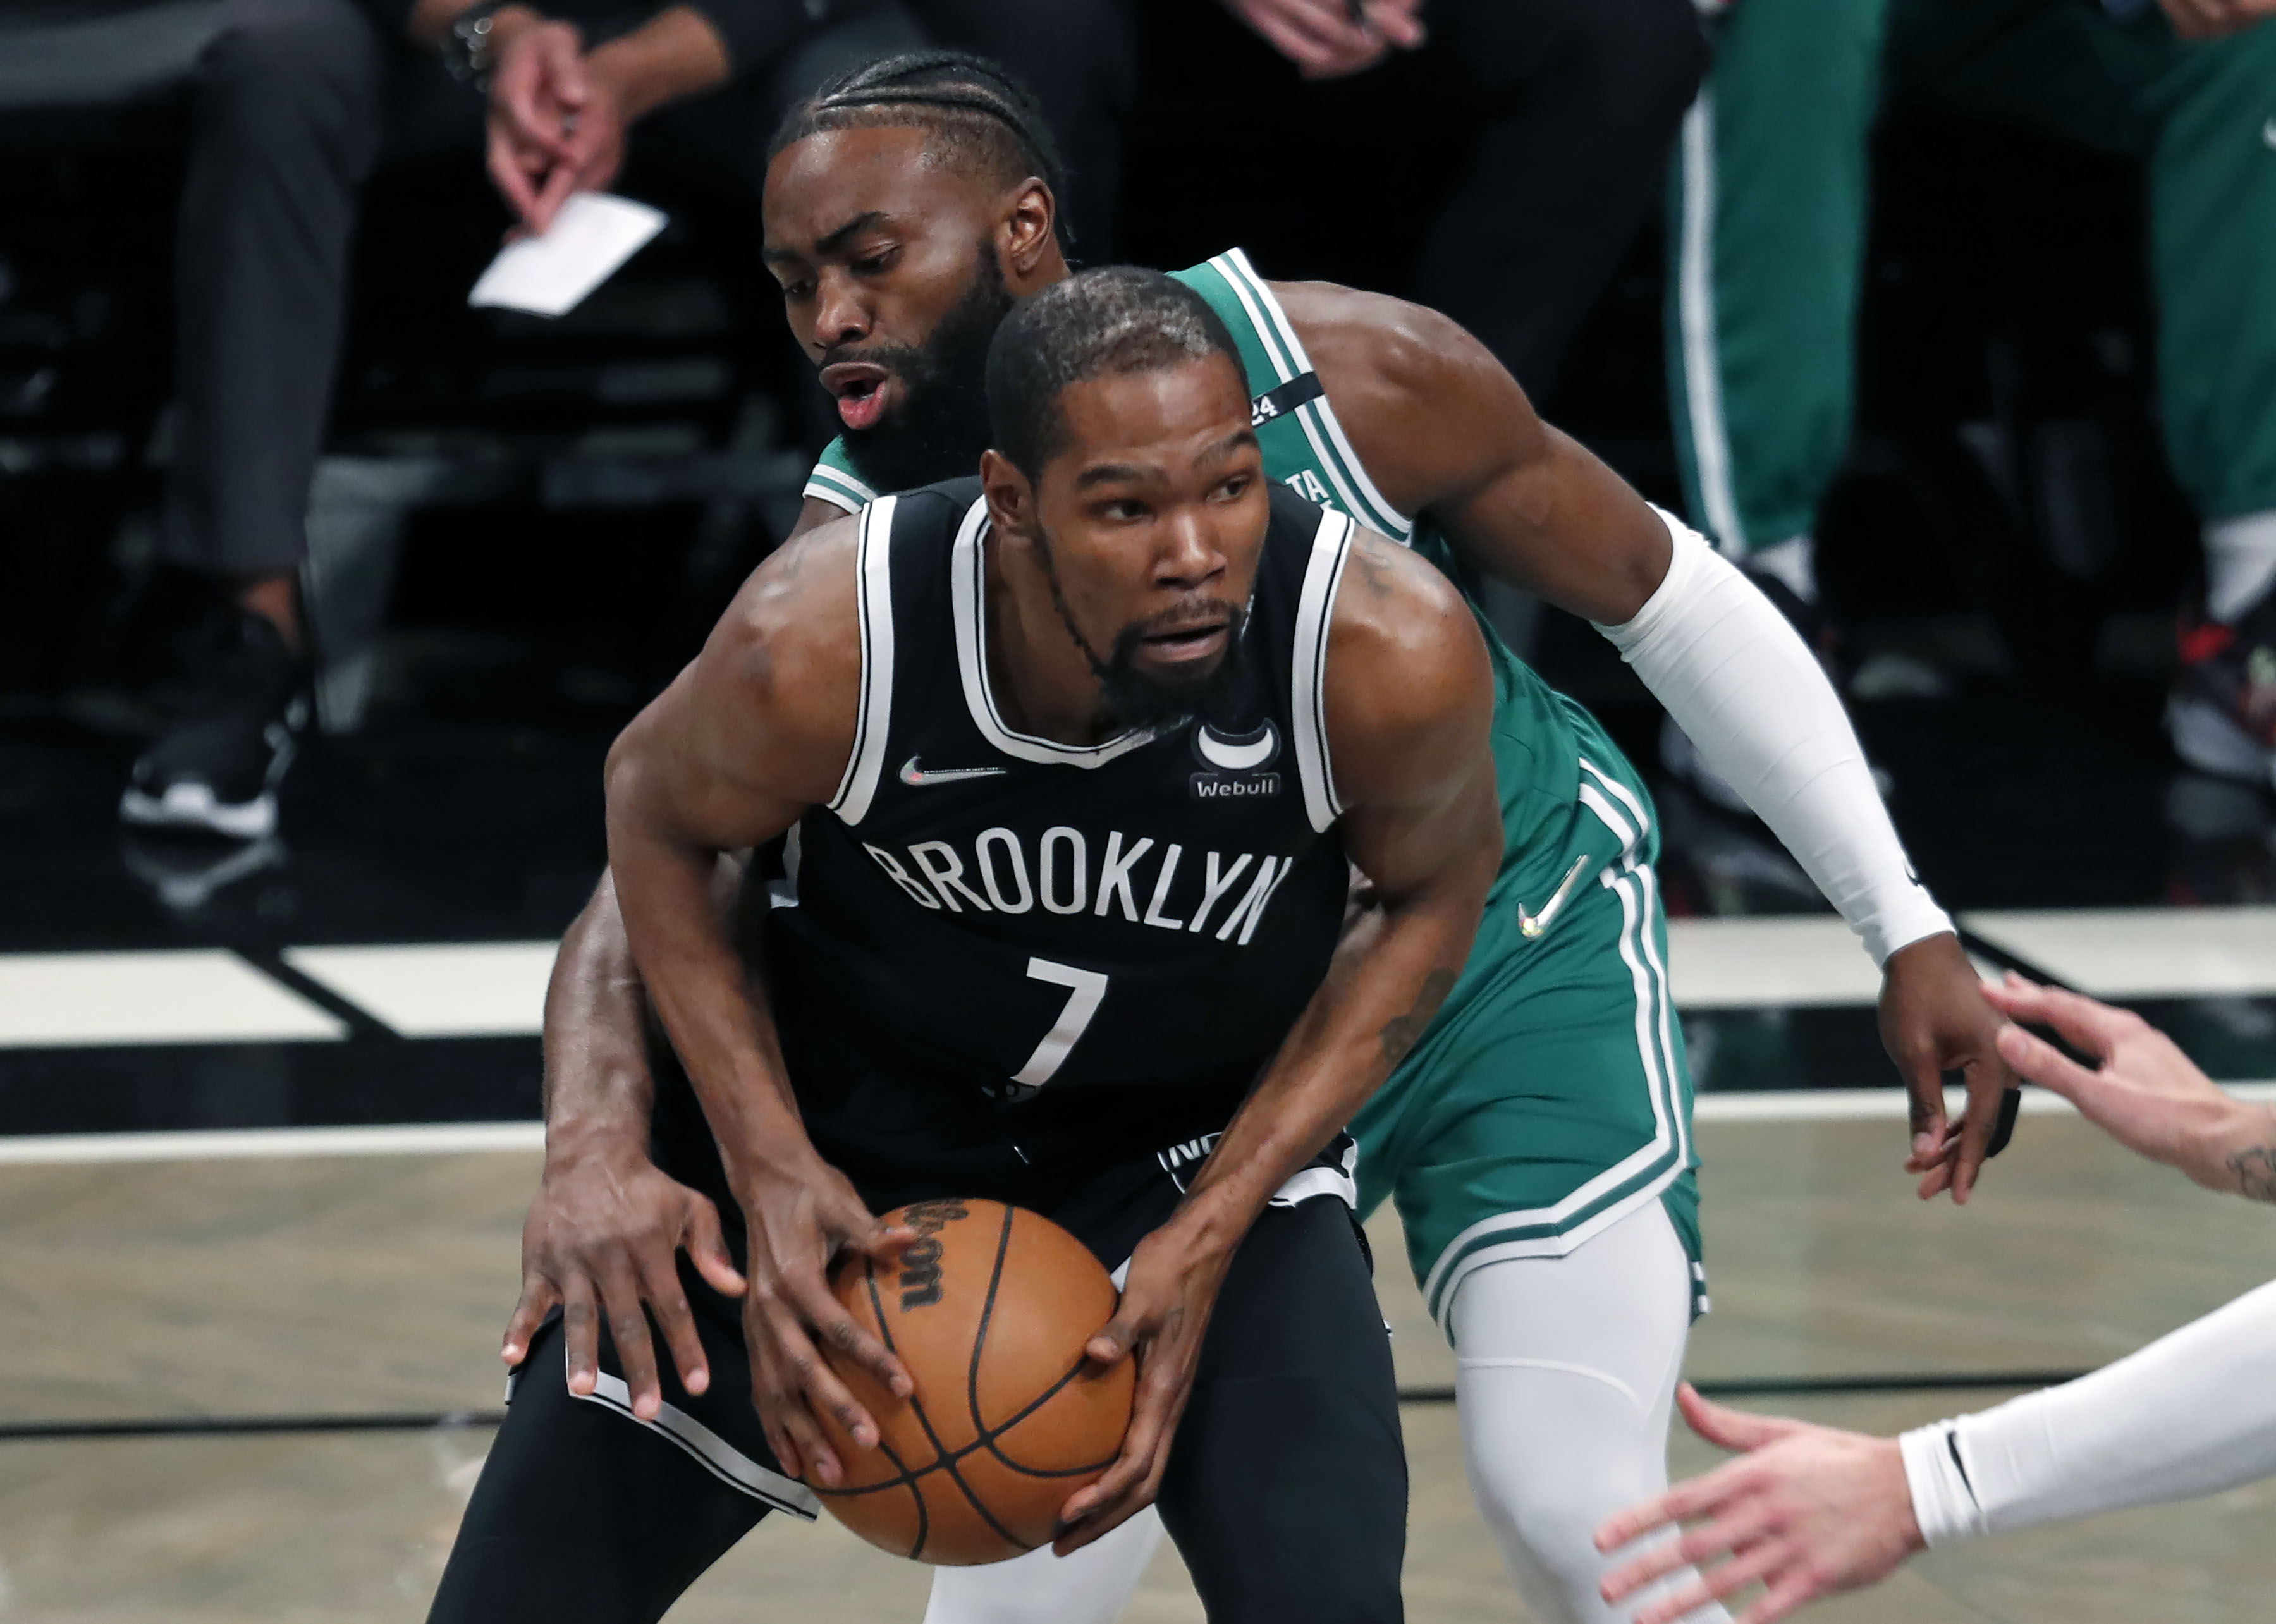 Kevin Durant revealed why he requested a trade from the Nets 